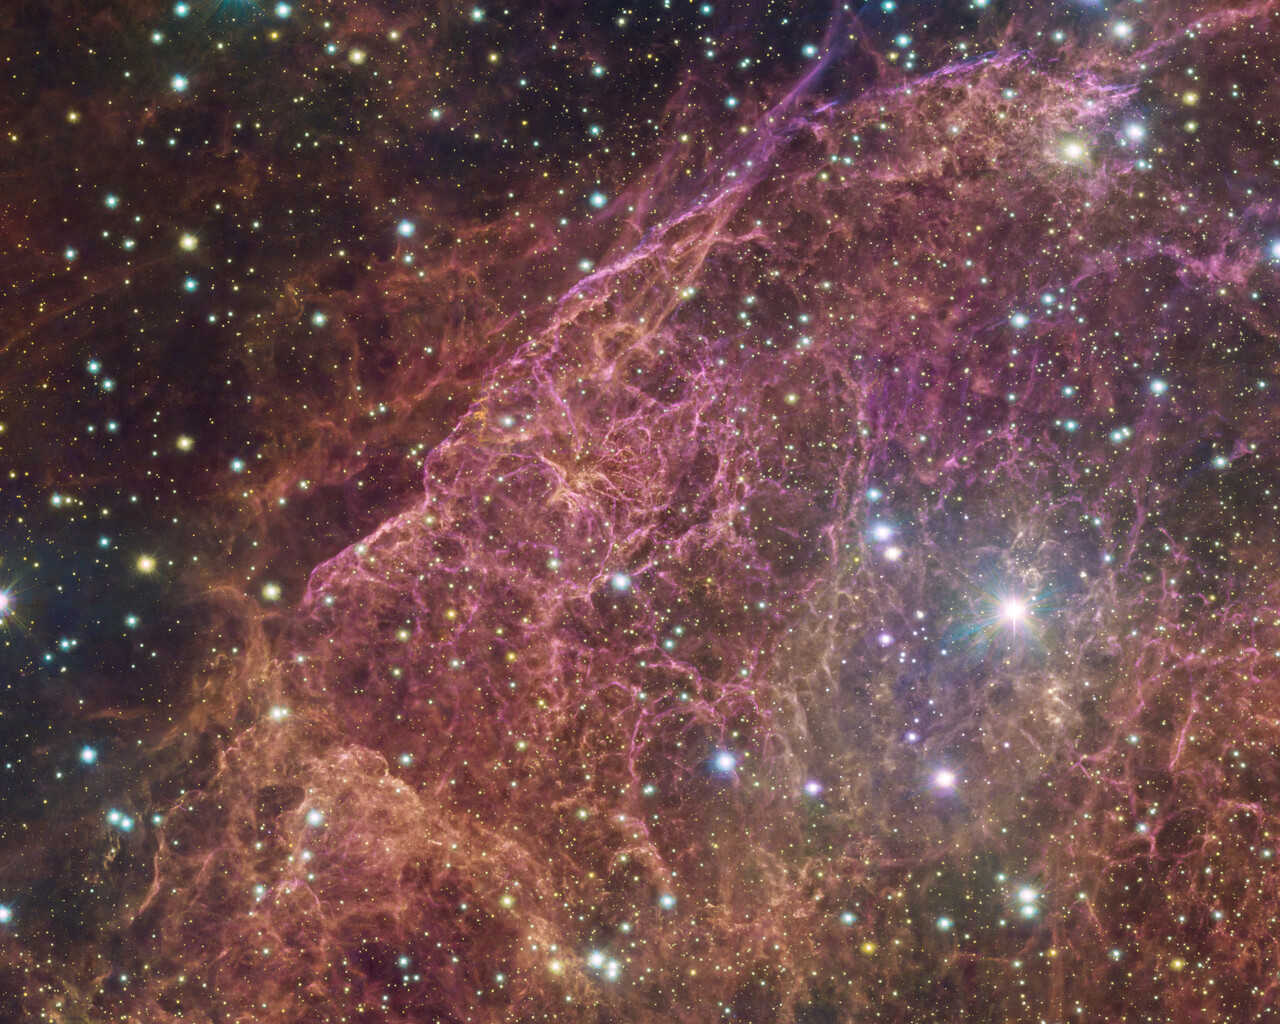 ESO telescope captures beautiful remains of massive star that died in powerful explosion